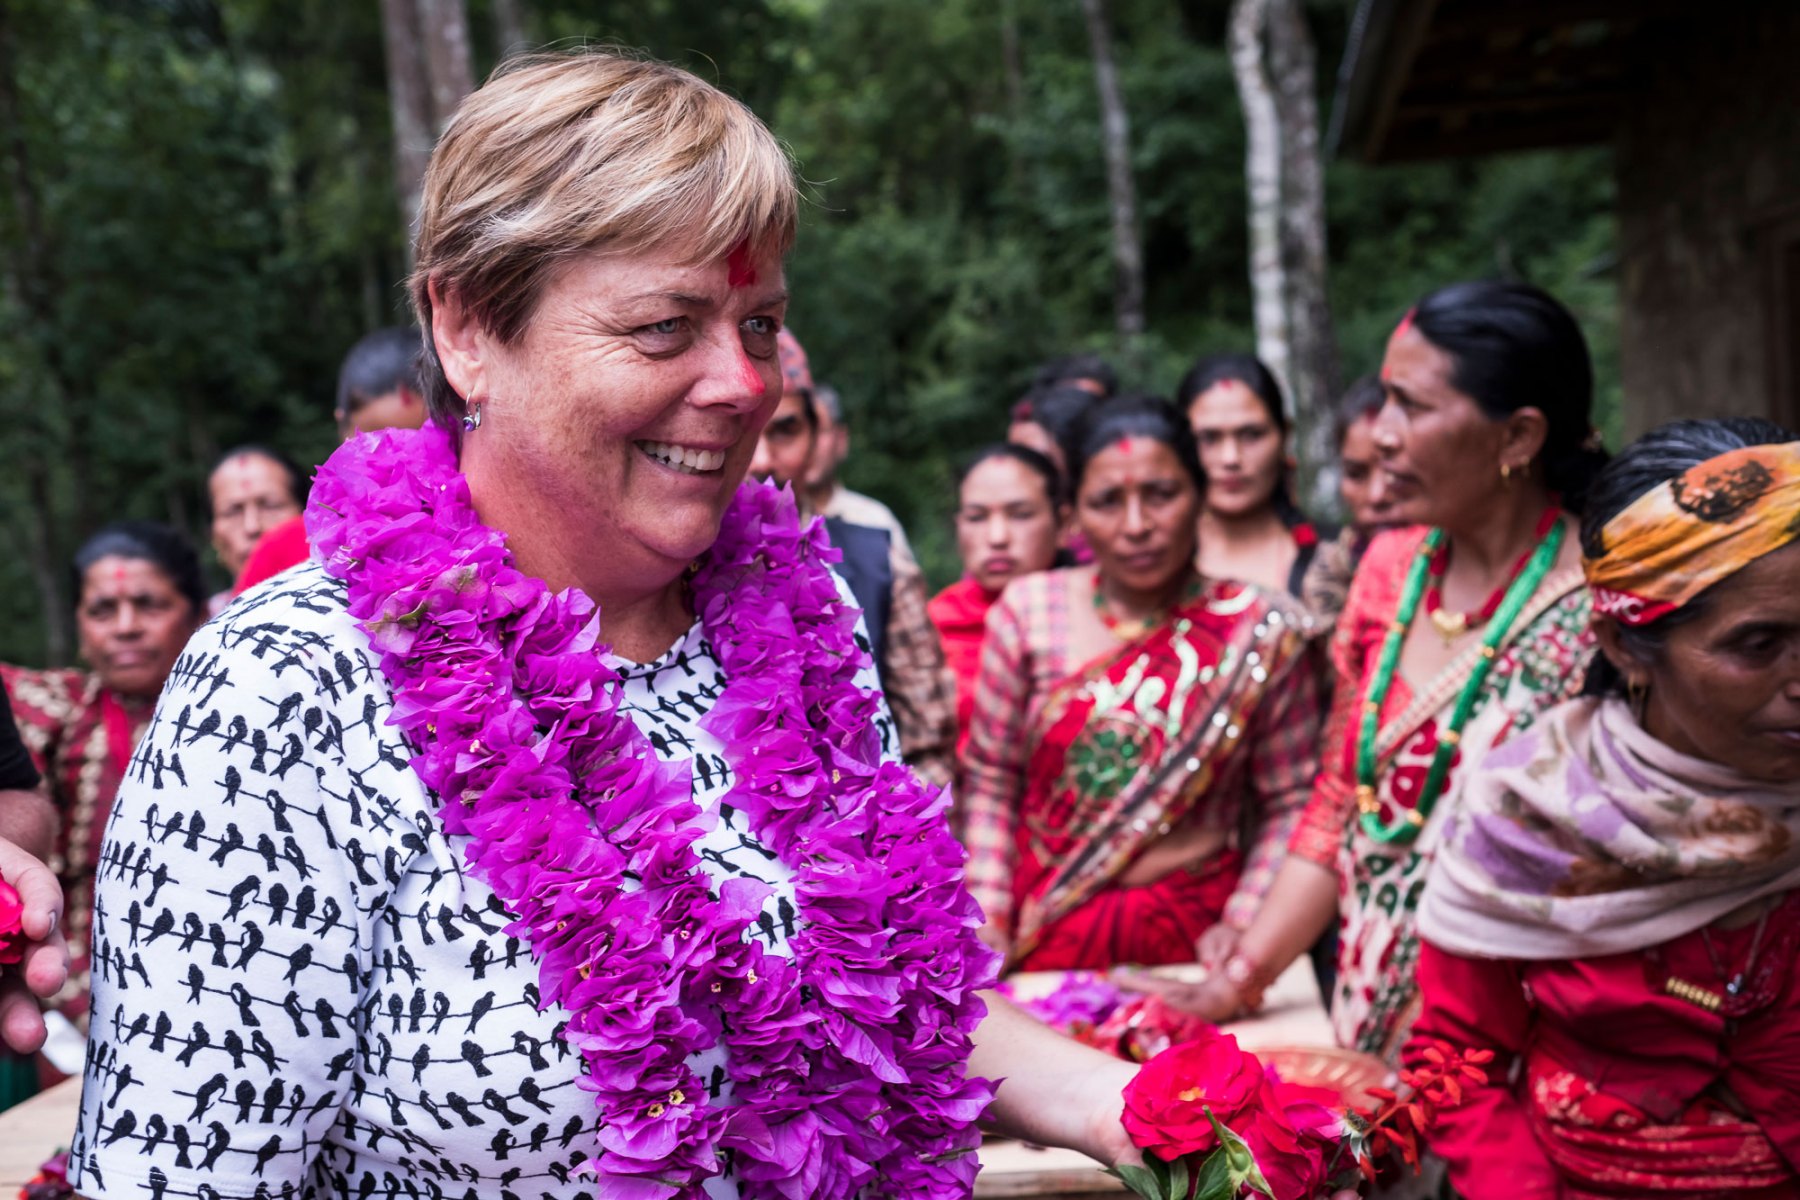 Cathy Reade Director of Public Affairs and Communication at The Crawford Fund is greeted by members of the Chaubas Community Forest Users Group. The group is predominantly made up of women and they are highly engaged in the silvicultural management of community forests and have been farming cardamom in Fagar Khola community forest for the past two years. Cardamom is a high value crop that requires little maintenance once it's been planted and leads to additional income for the female farmers.